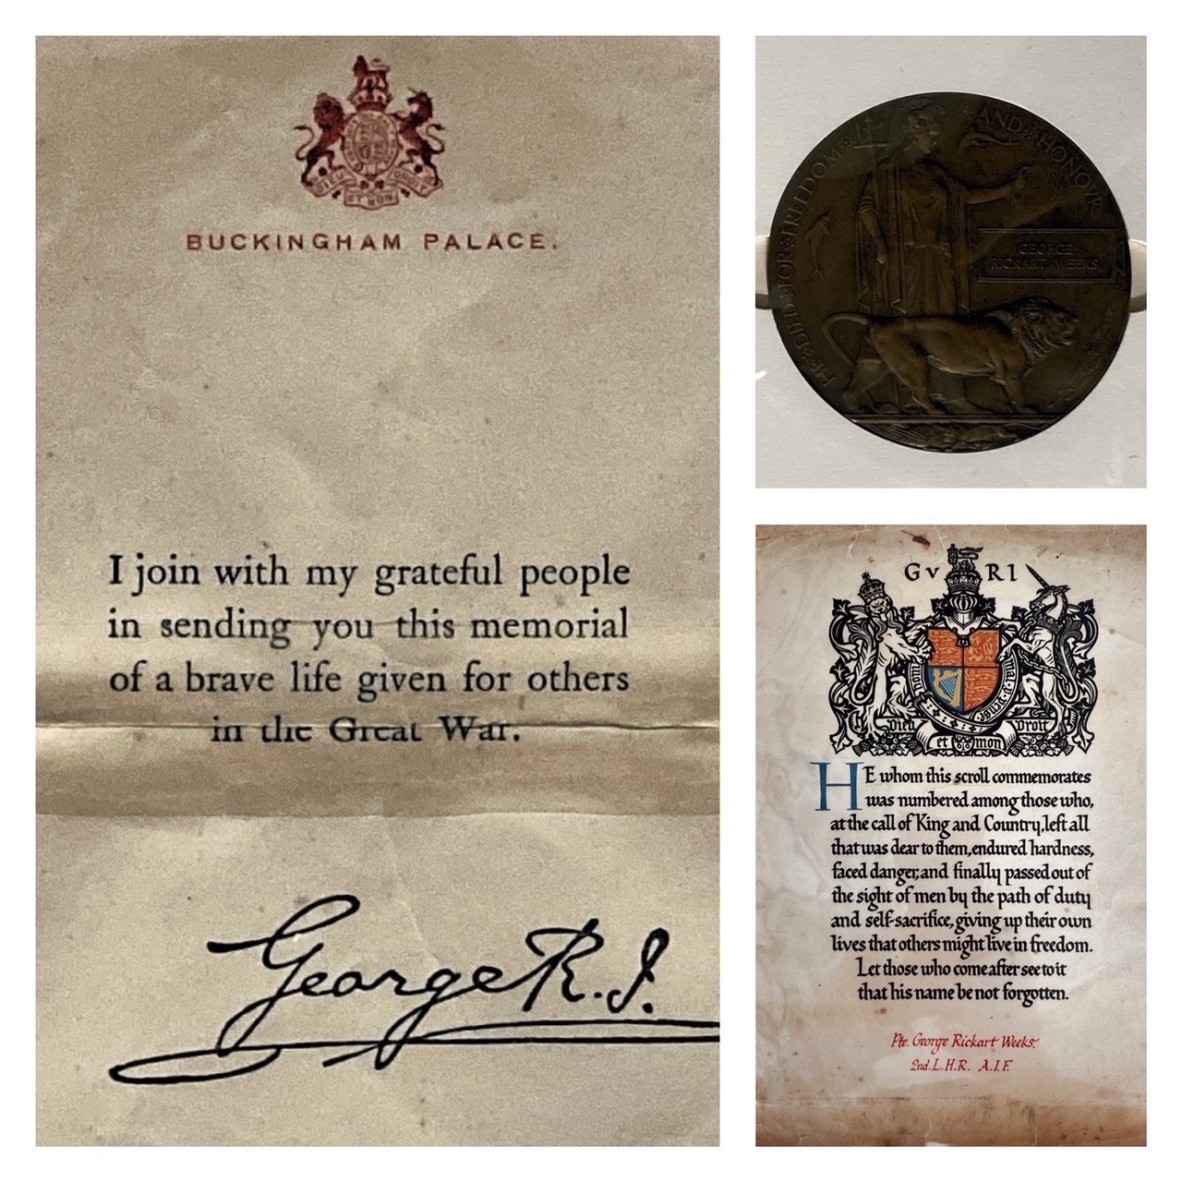 Clockwise from left Letter from Buckingham Palace accompanying the Memorial Plaque the Memorial Plaque and the Memorial Scroll